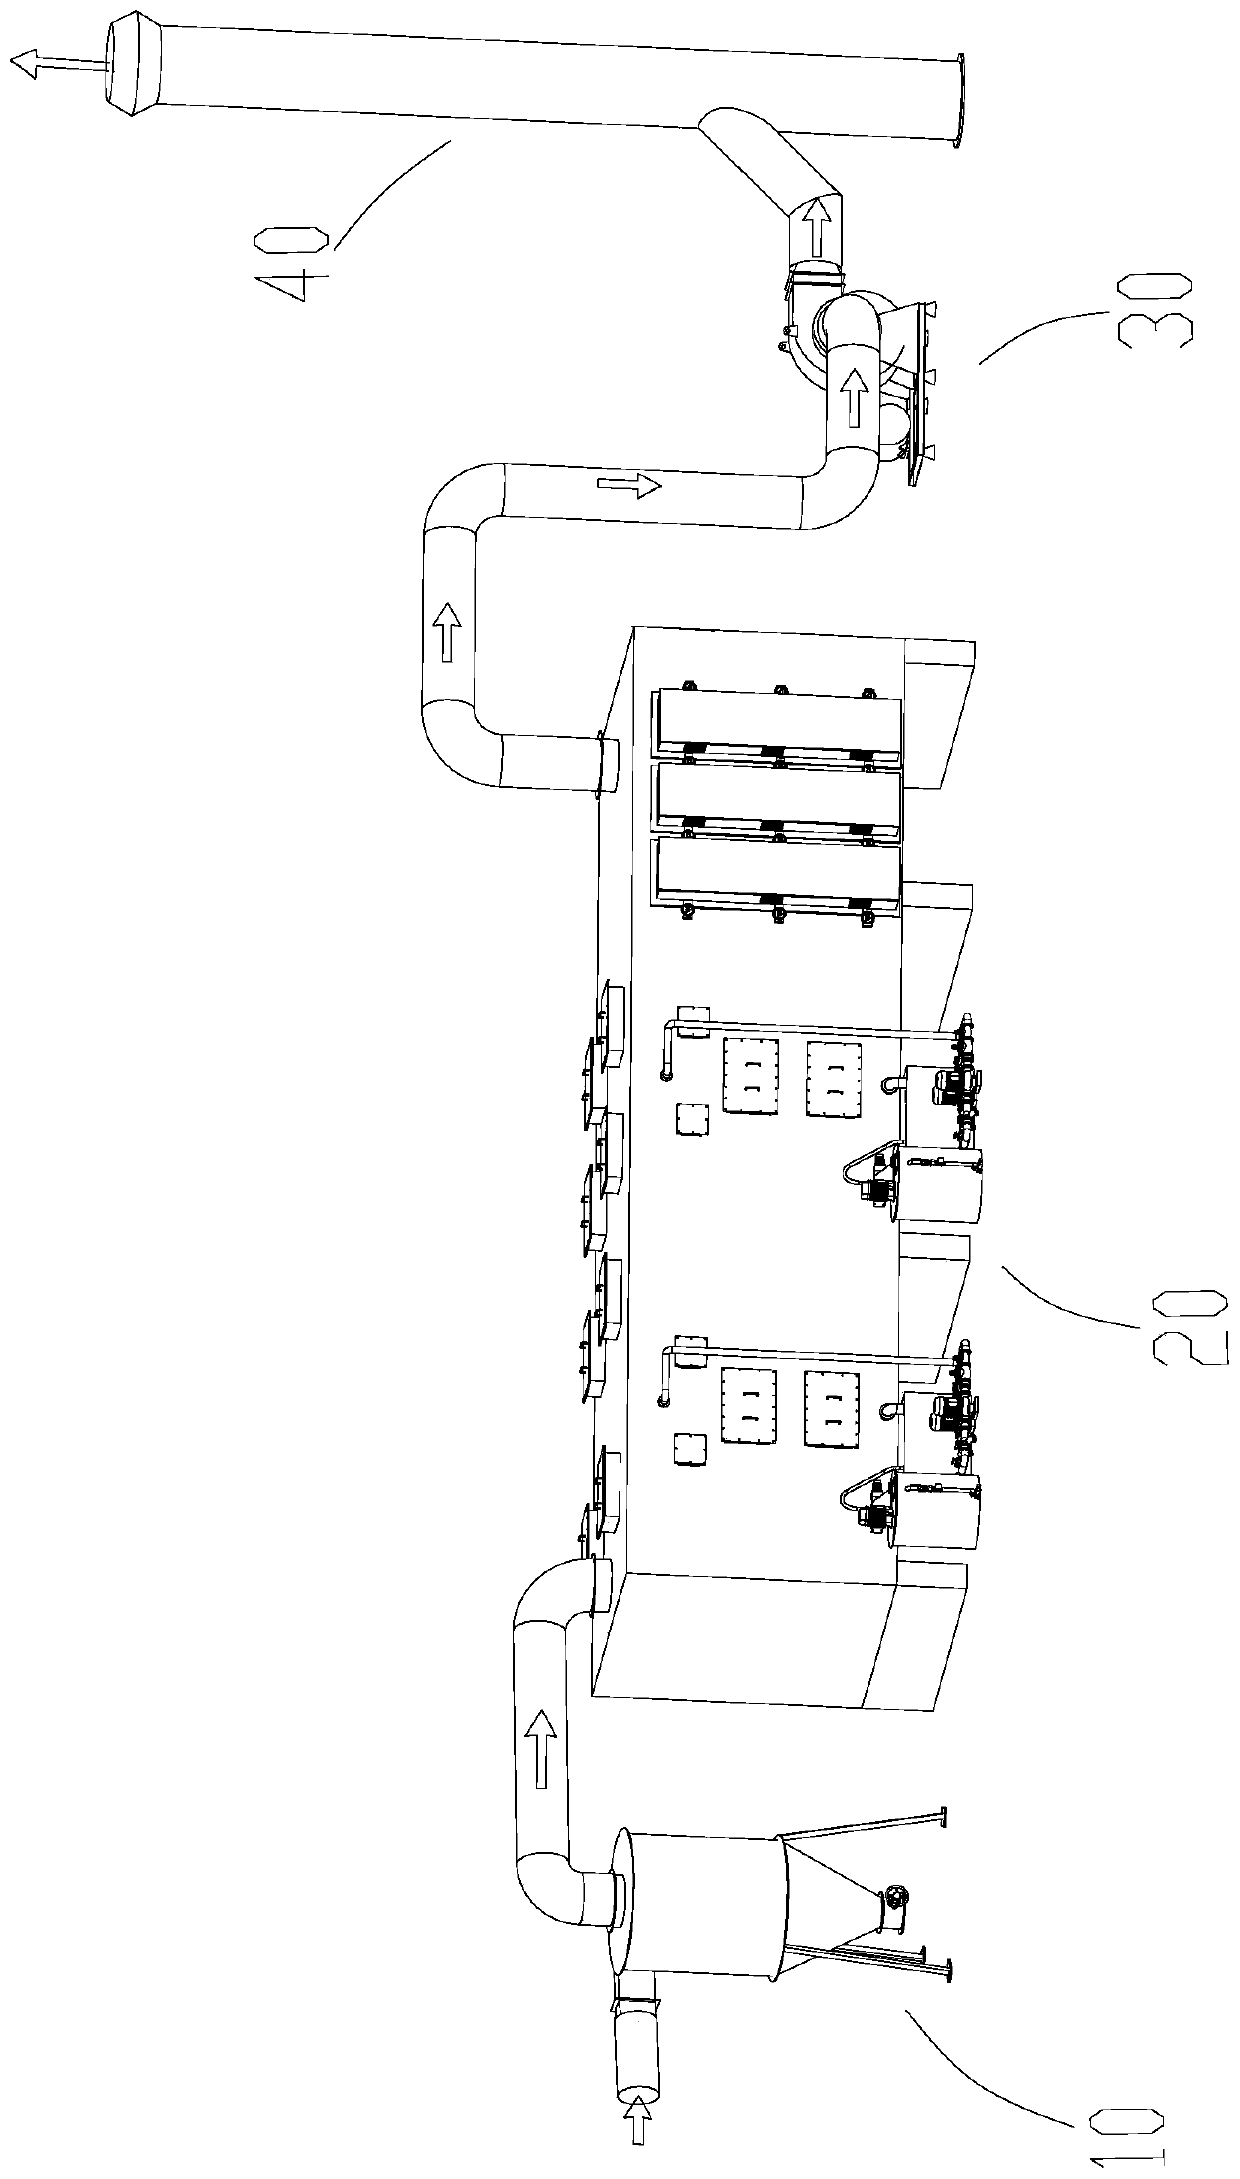 Sludge drying waste gas purification device and method for sewage treatment plant